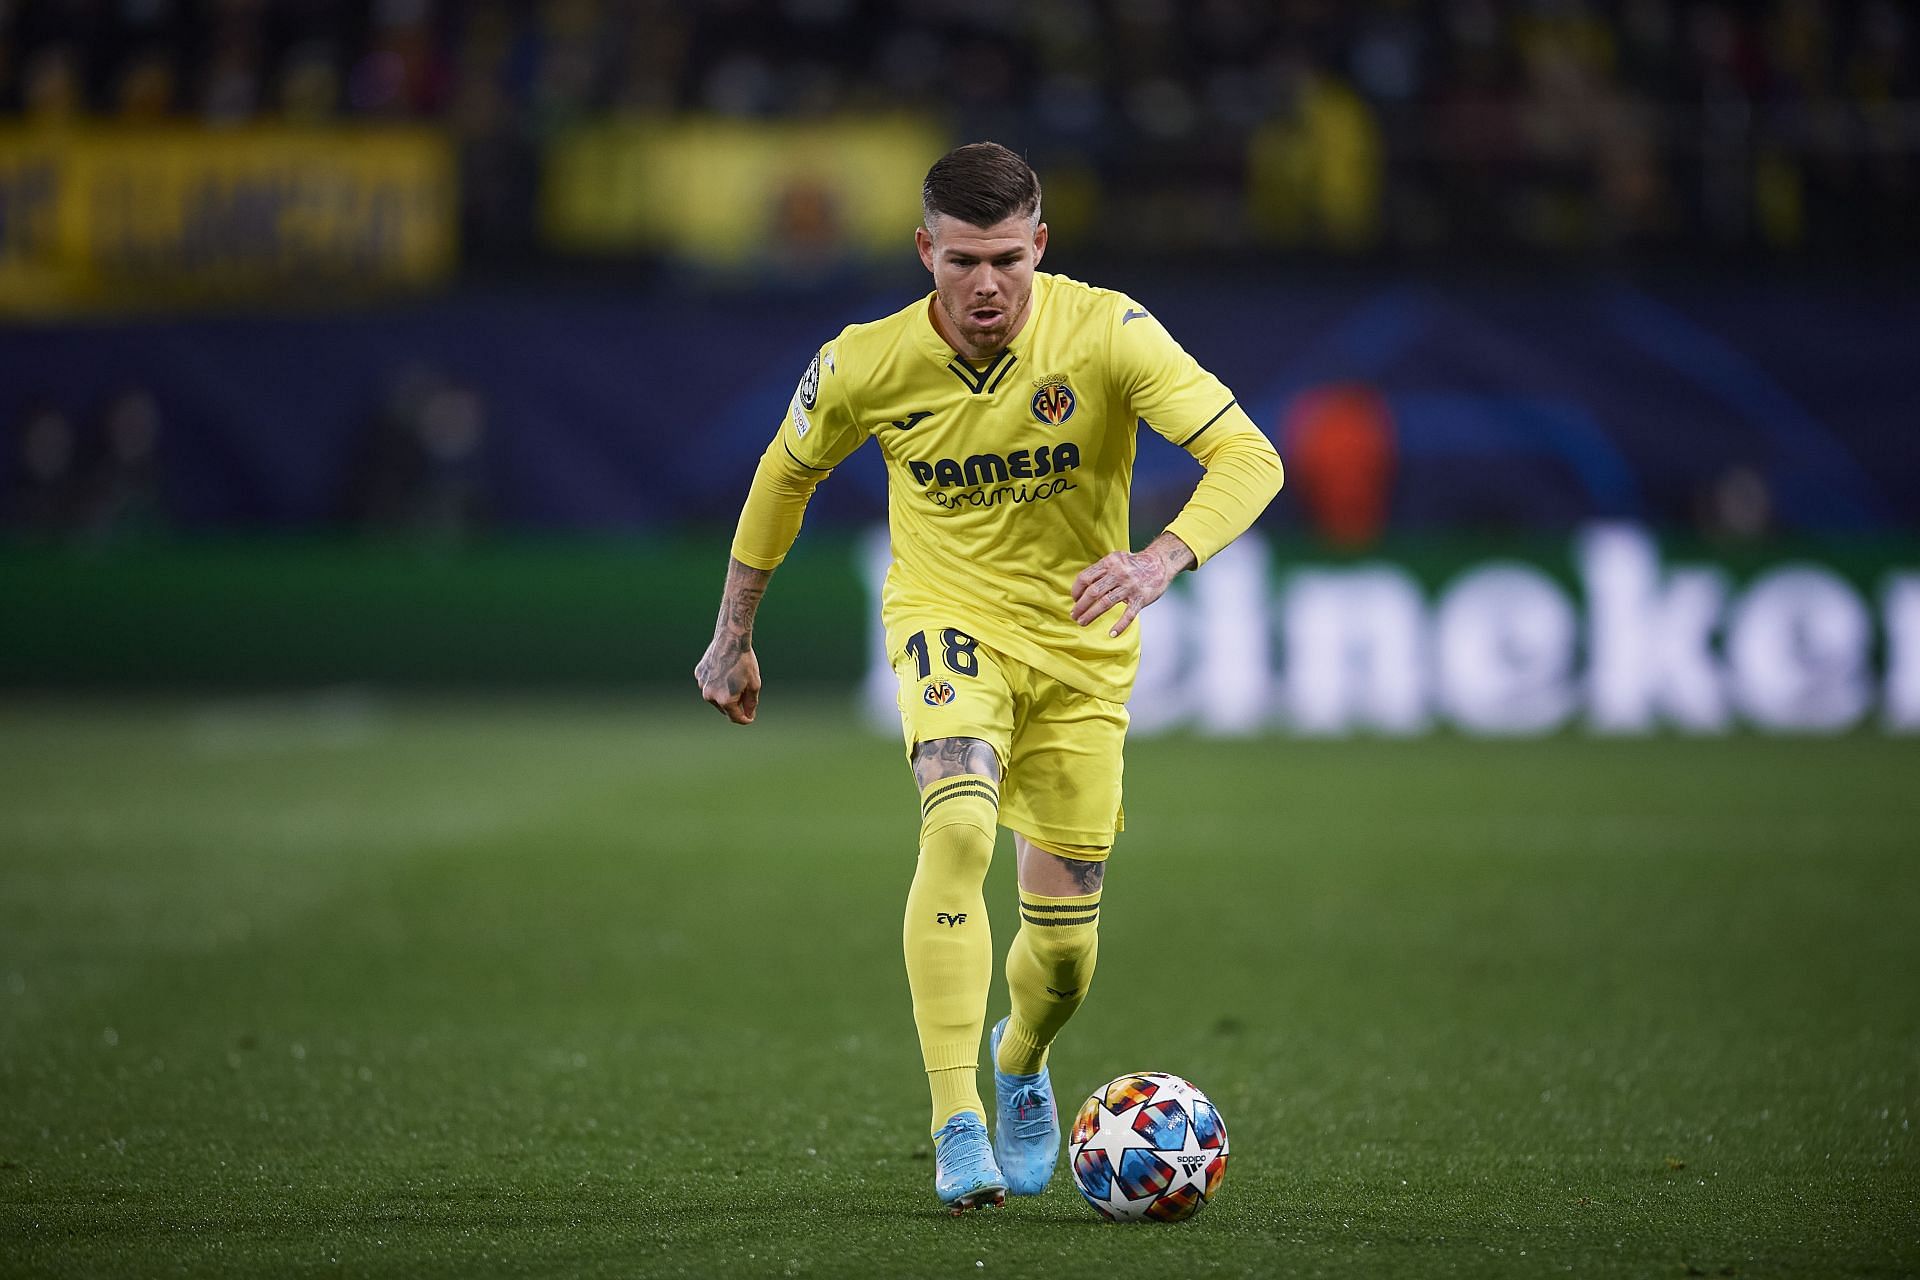 Villarreal have a point to prove